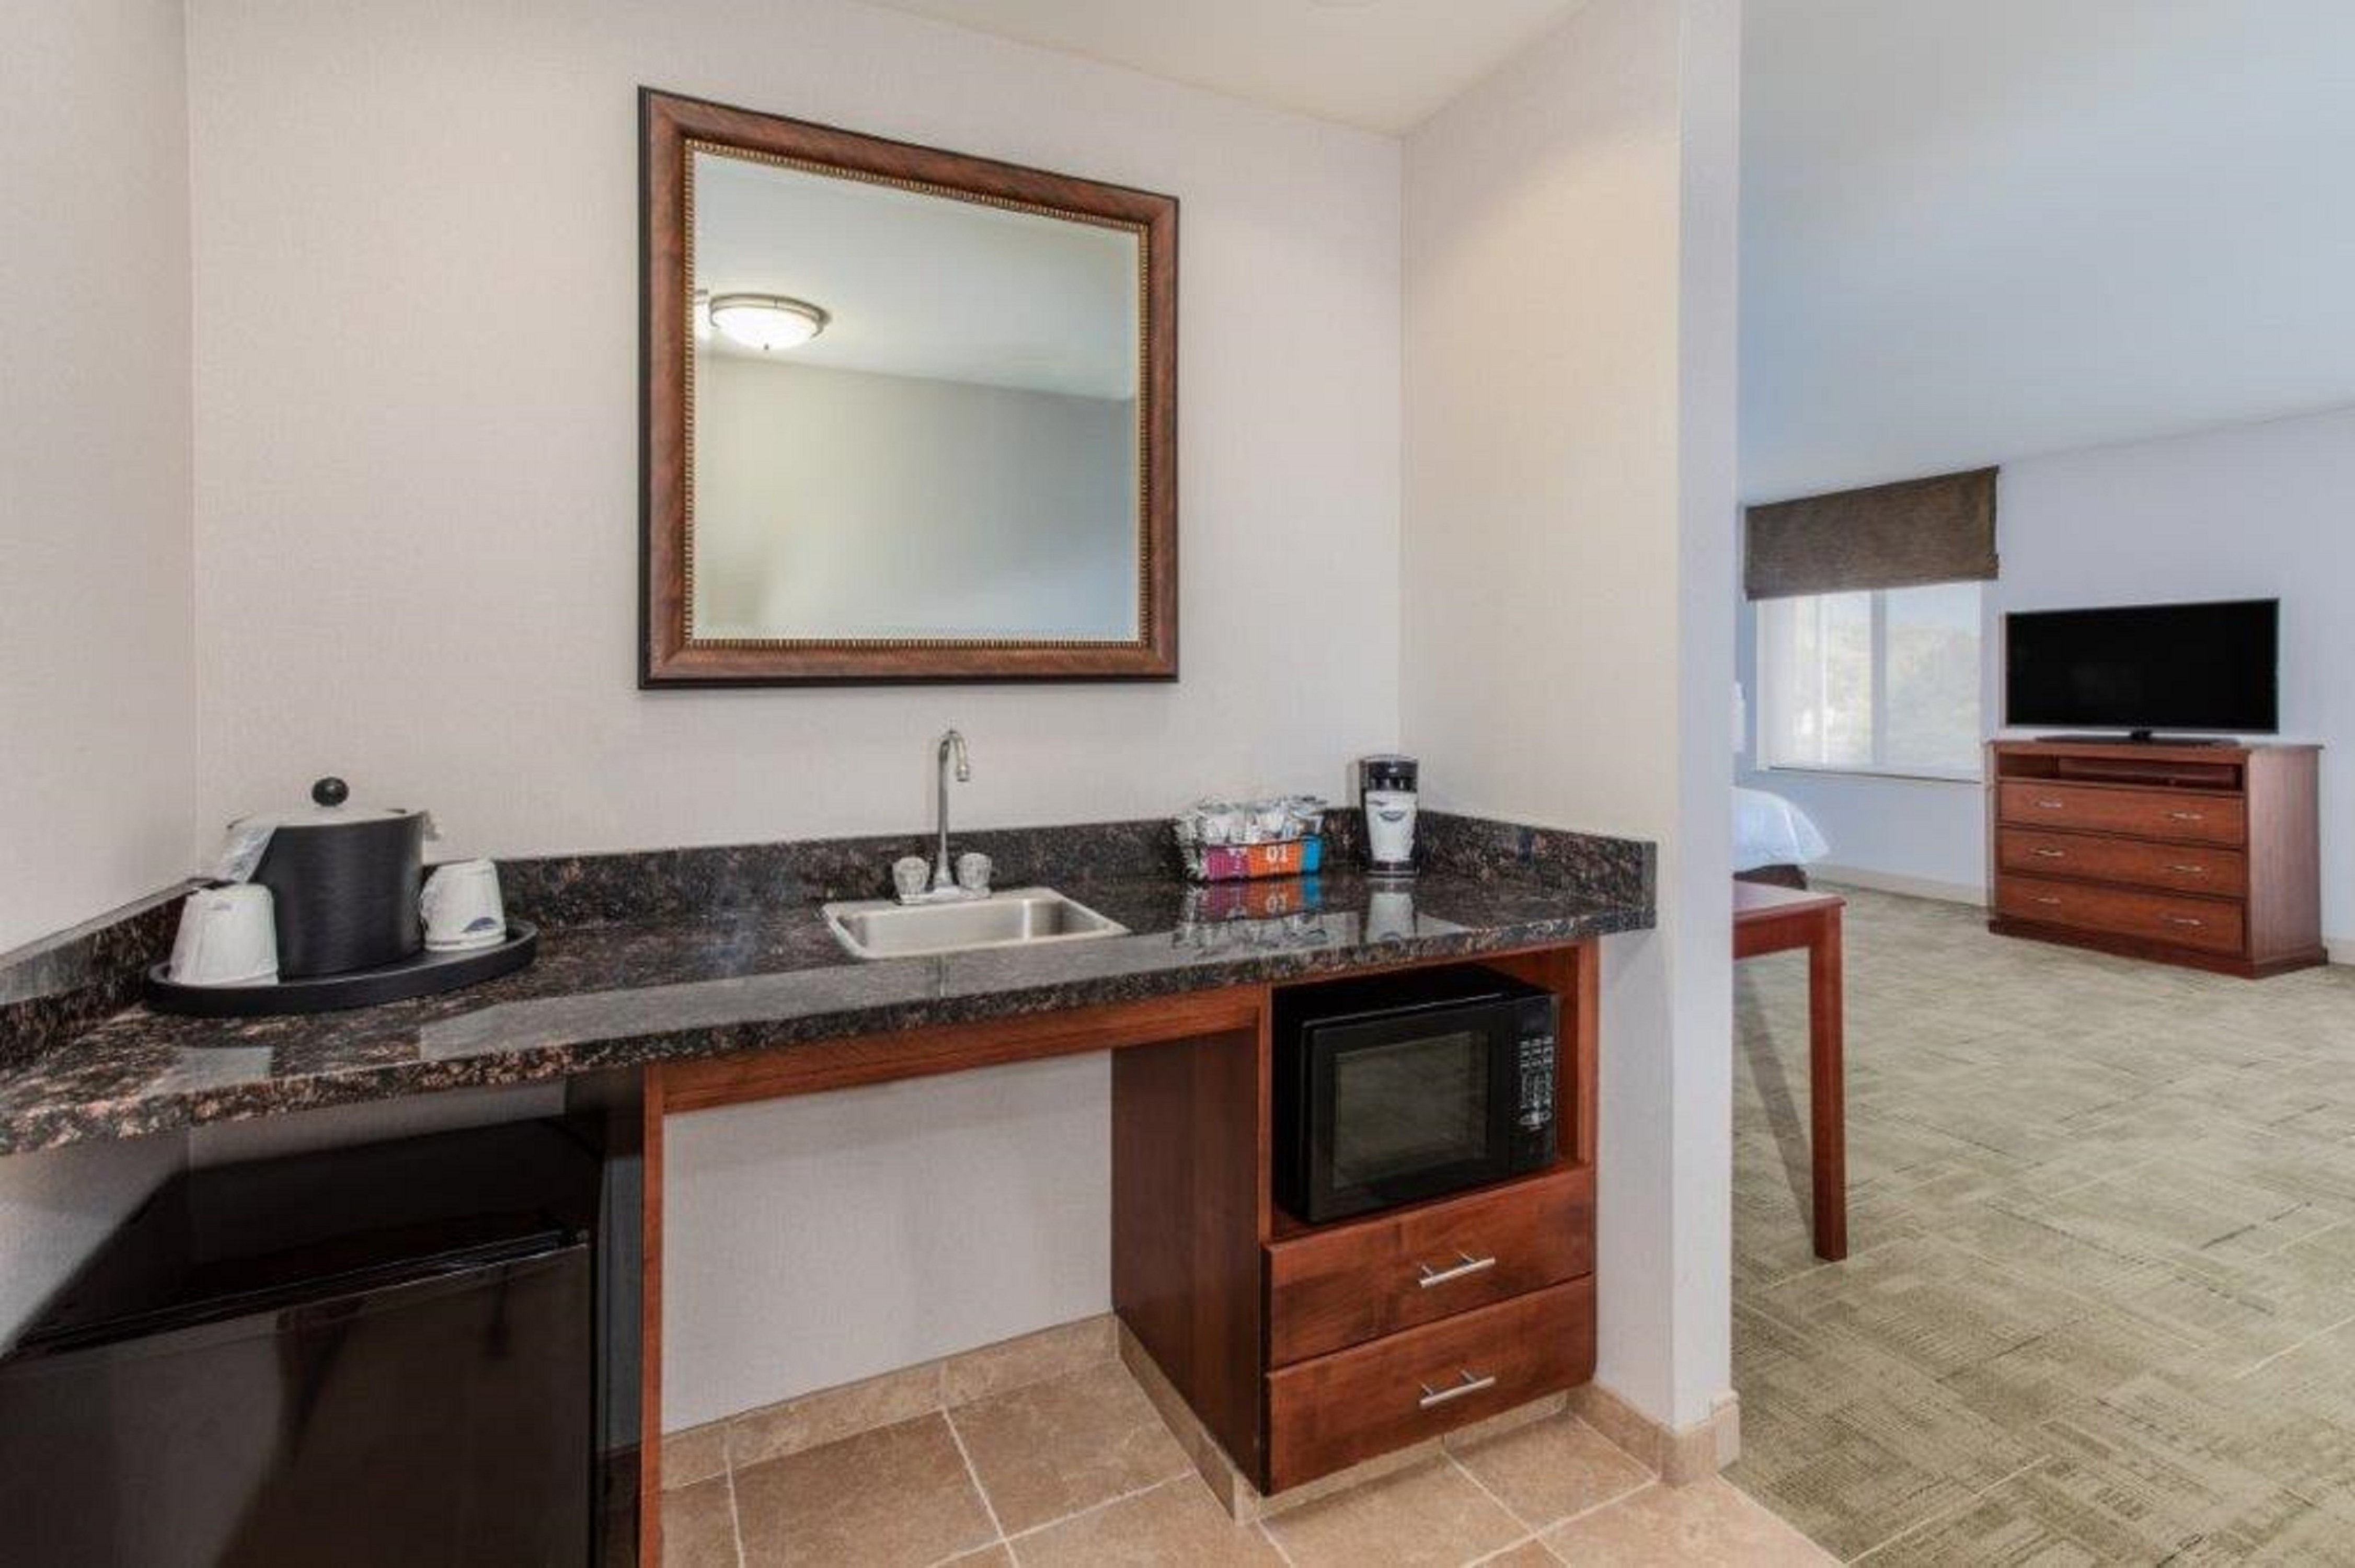 Suite wetbar area with sink and mirror